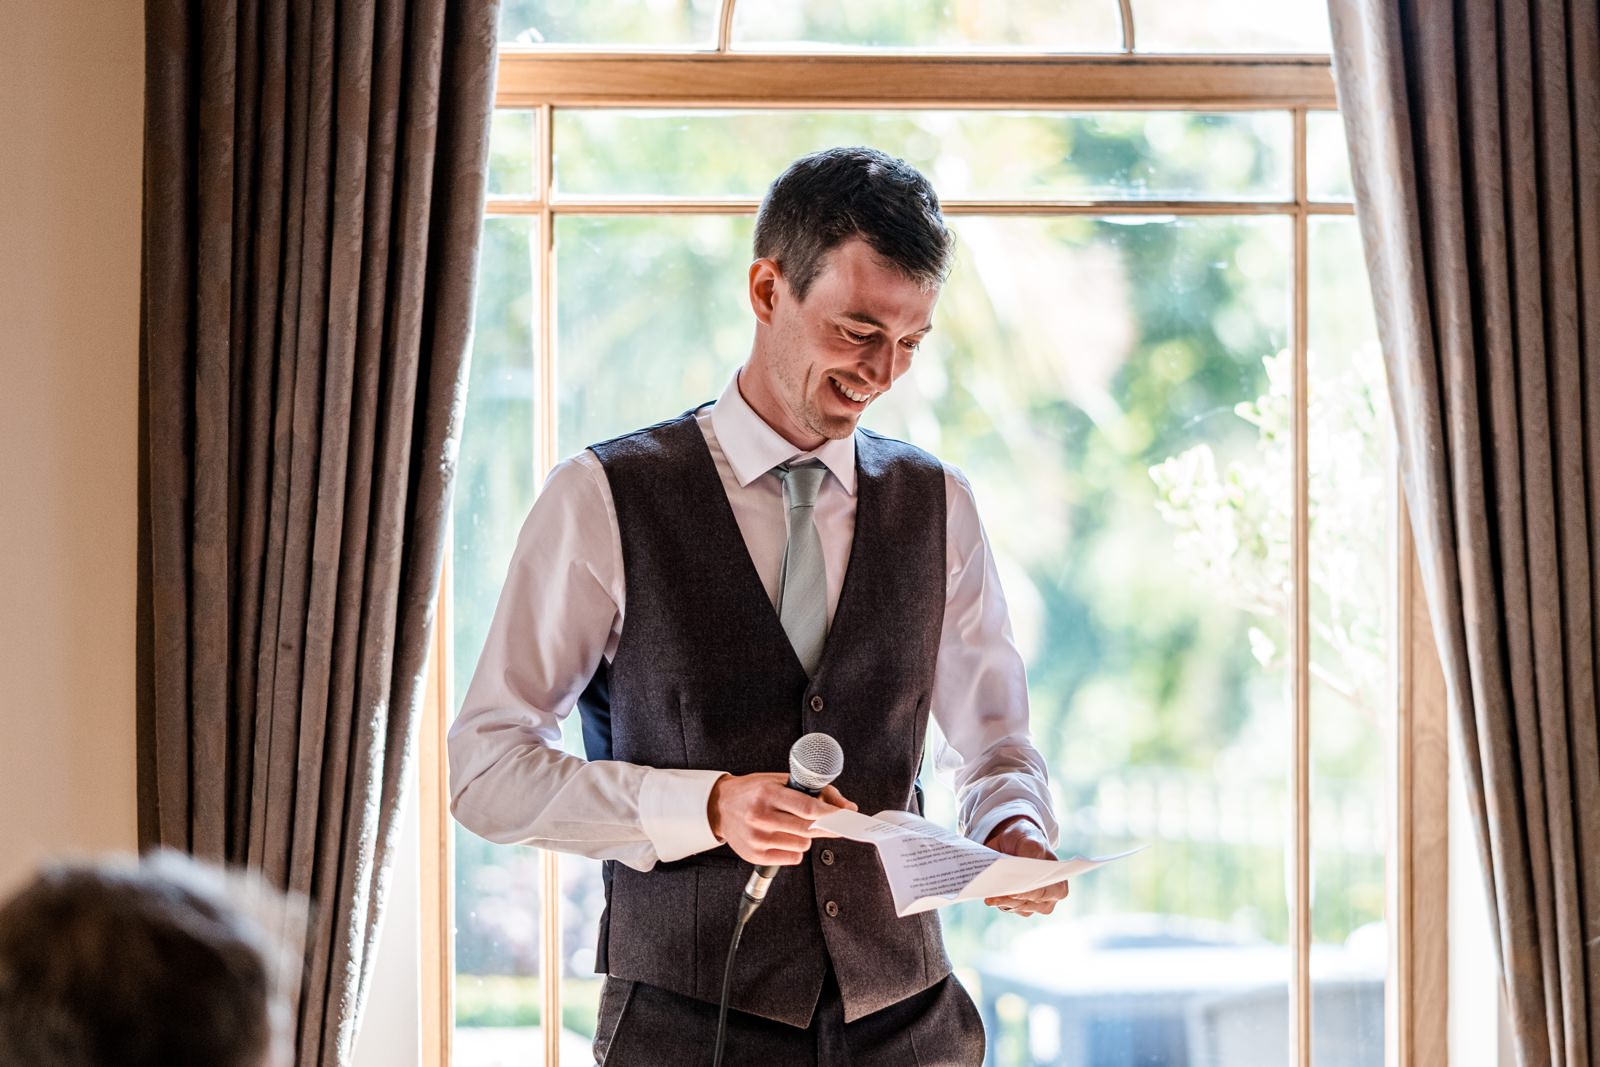 Wedding speeches at King Arthur Hotel, South Wales